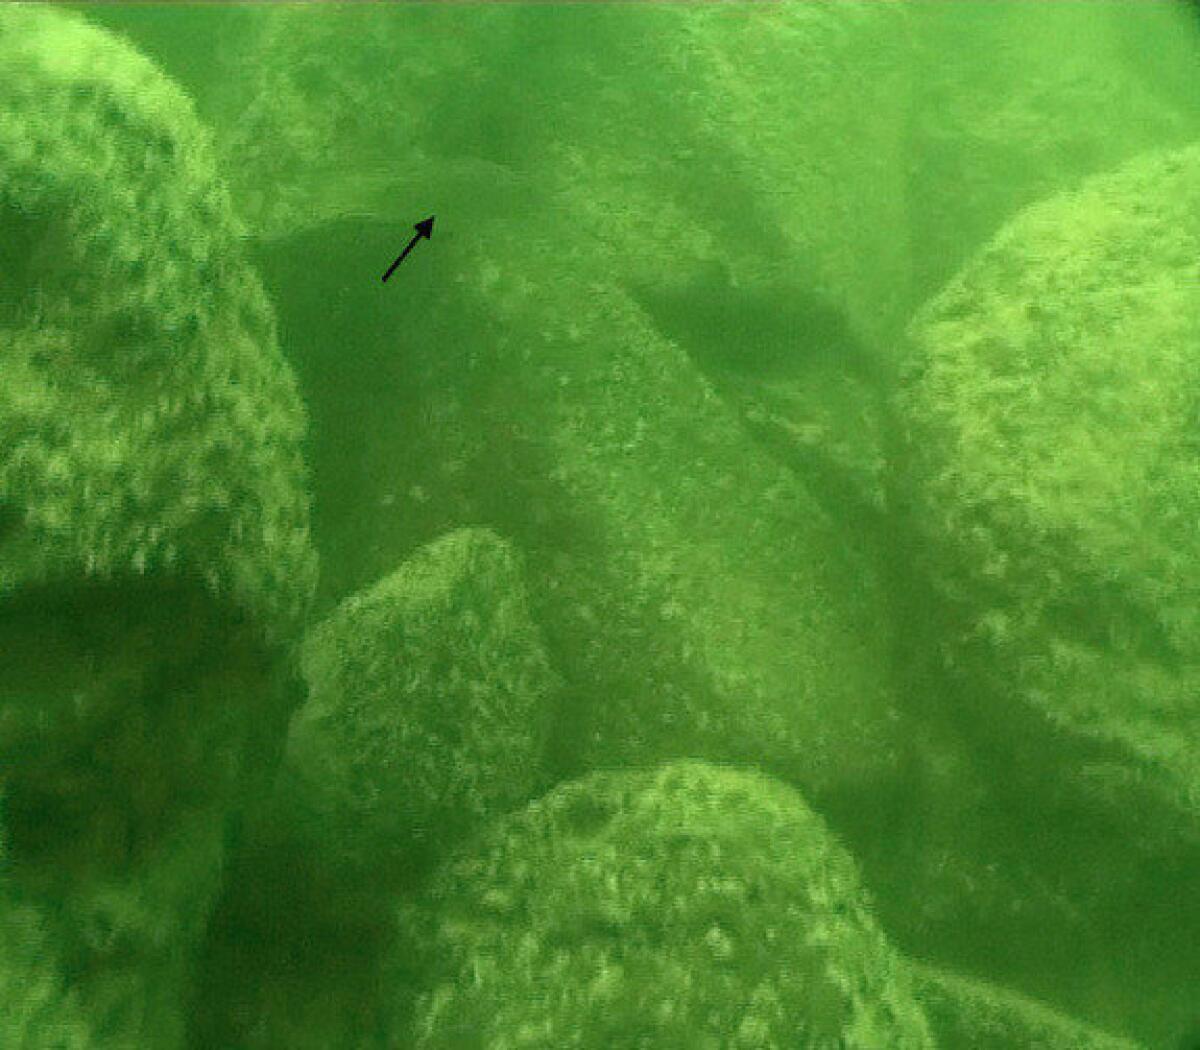 An underwater photo shows part of the monumental structure, which is made of basalt boulders. The fish (marked with an arrow) is about 4 inches long.